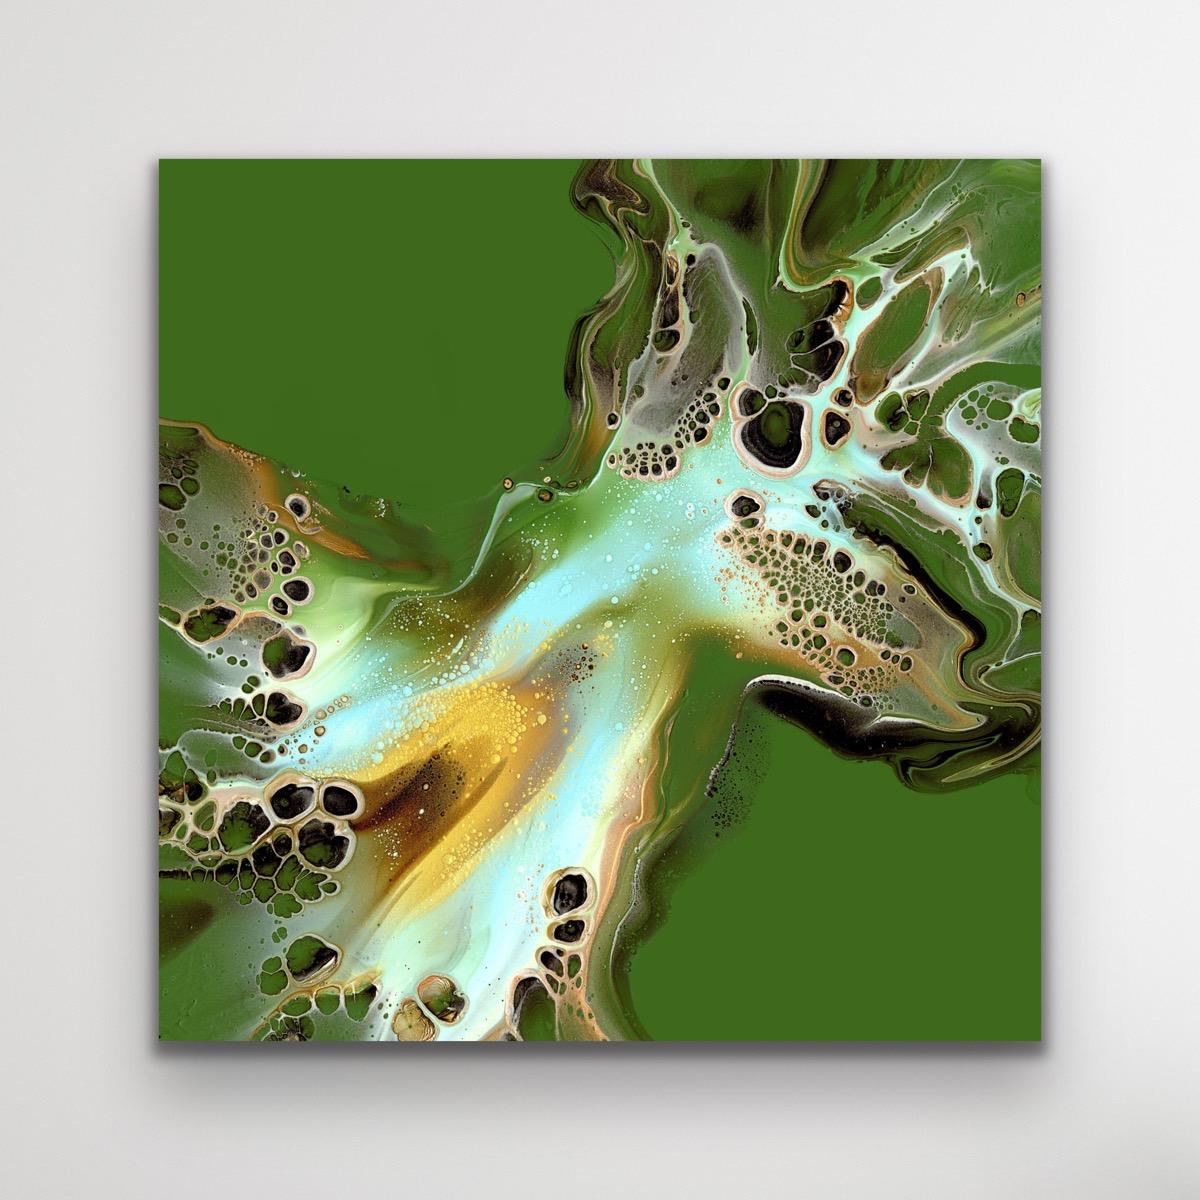 Modern Abstract Fluid Art, Large Painting Giclee Print, LE Signed by artist.